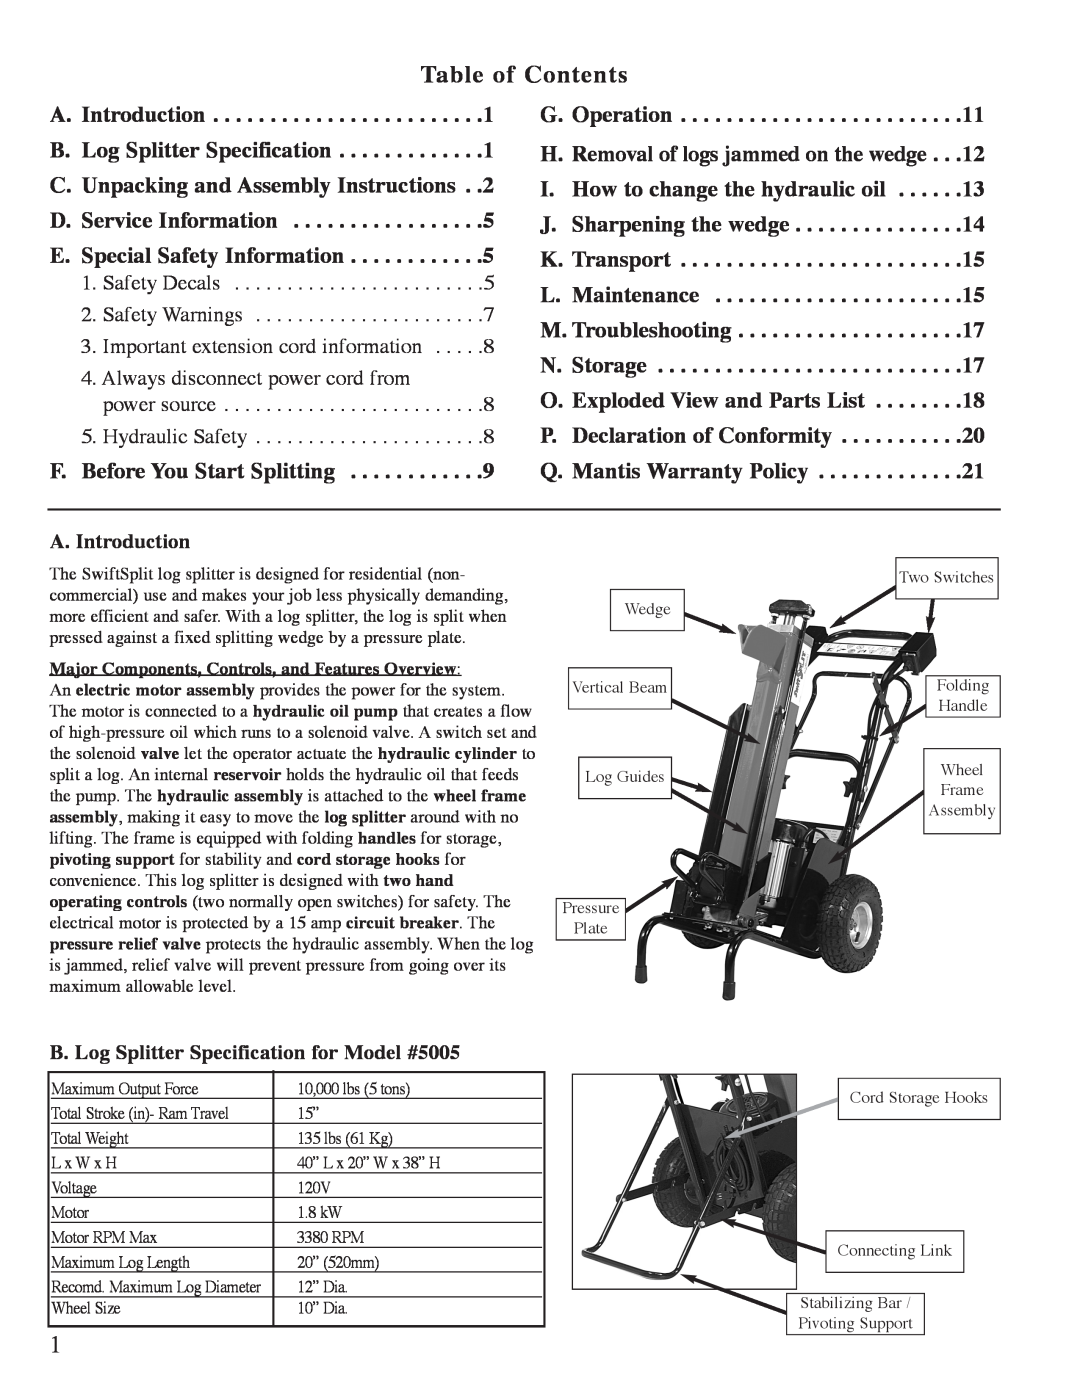 Mantis Swift Split Table of Contents, A. Introduction B. Log Splitter Specification, E. Special Safety Information 